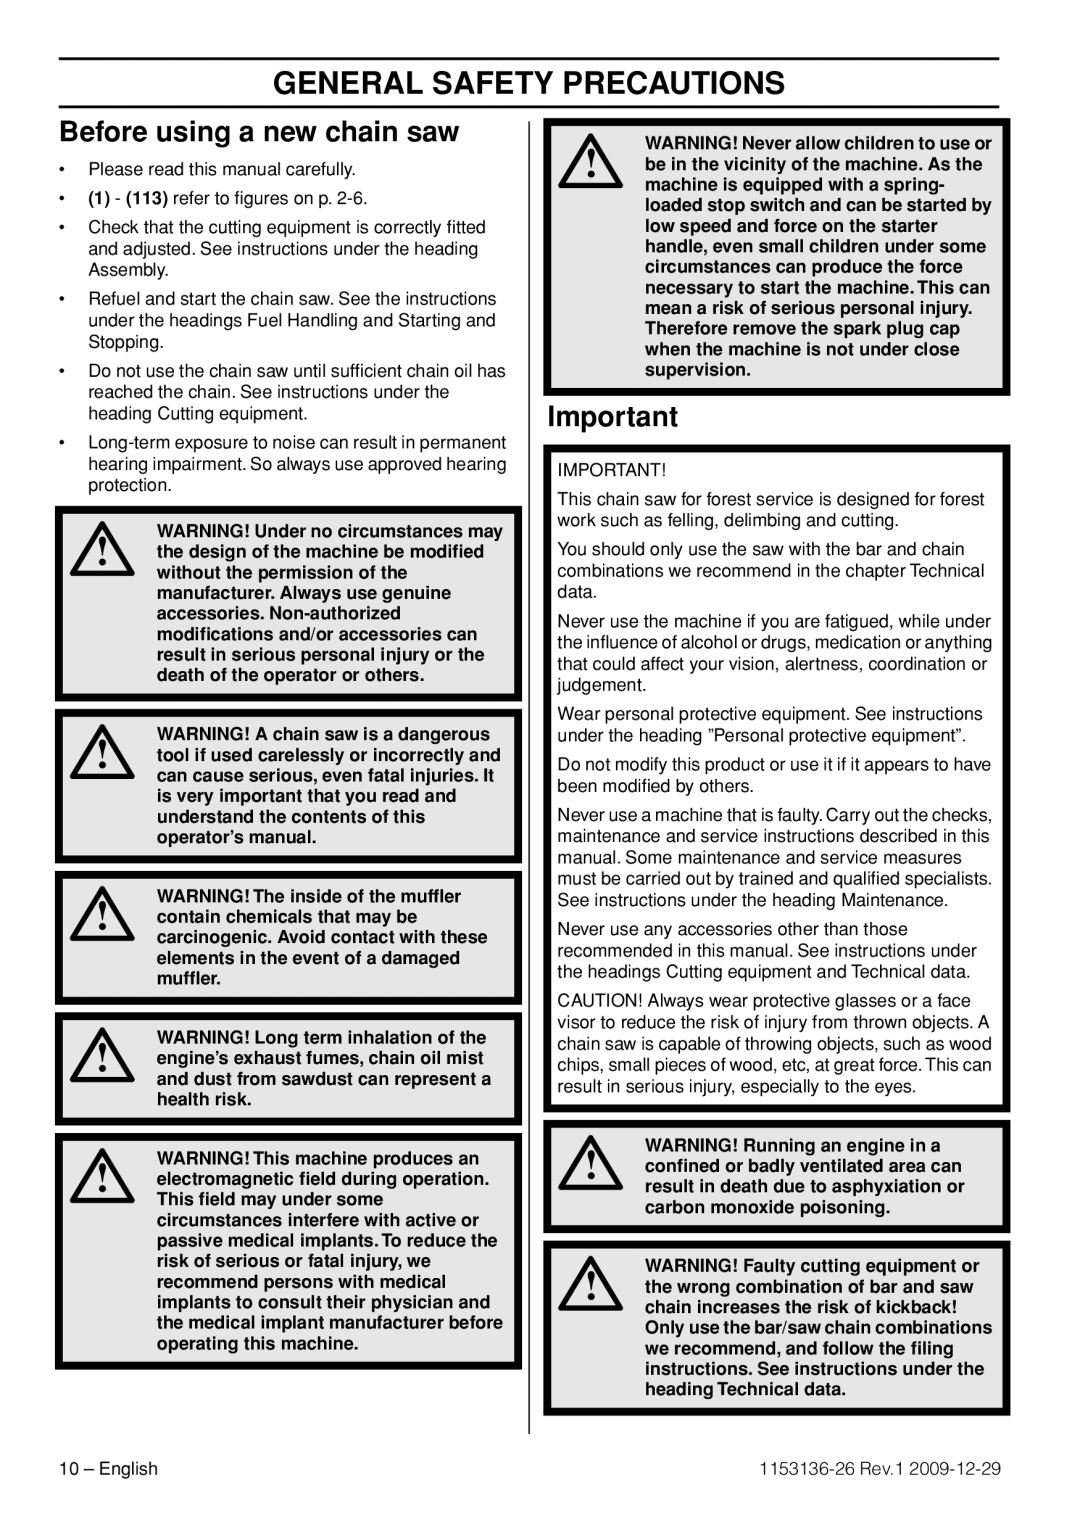 Husqvarna 1153136-26 manual General Safety Precautions, Before using a new chain saw 